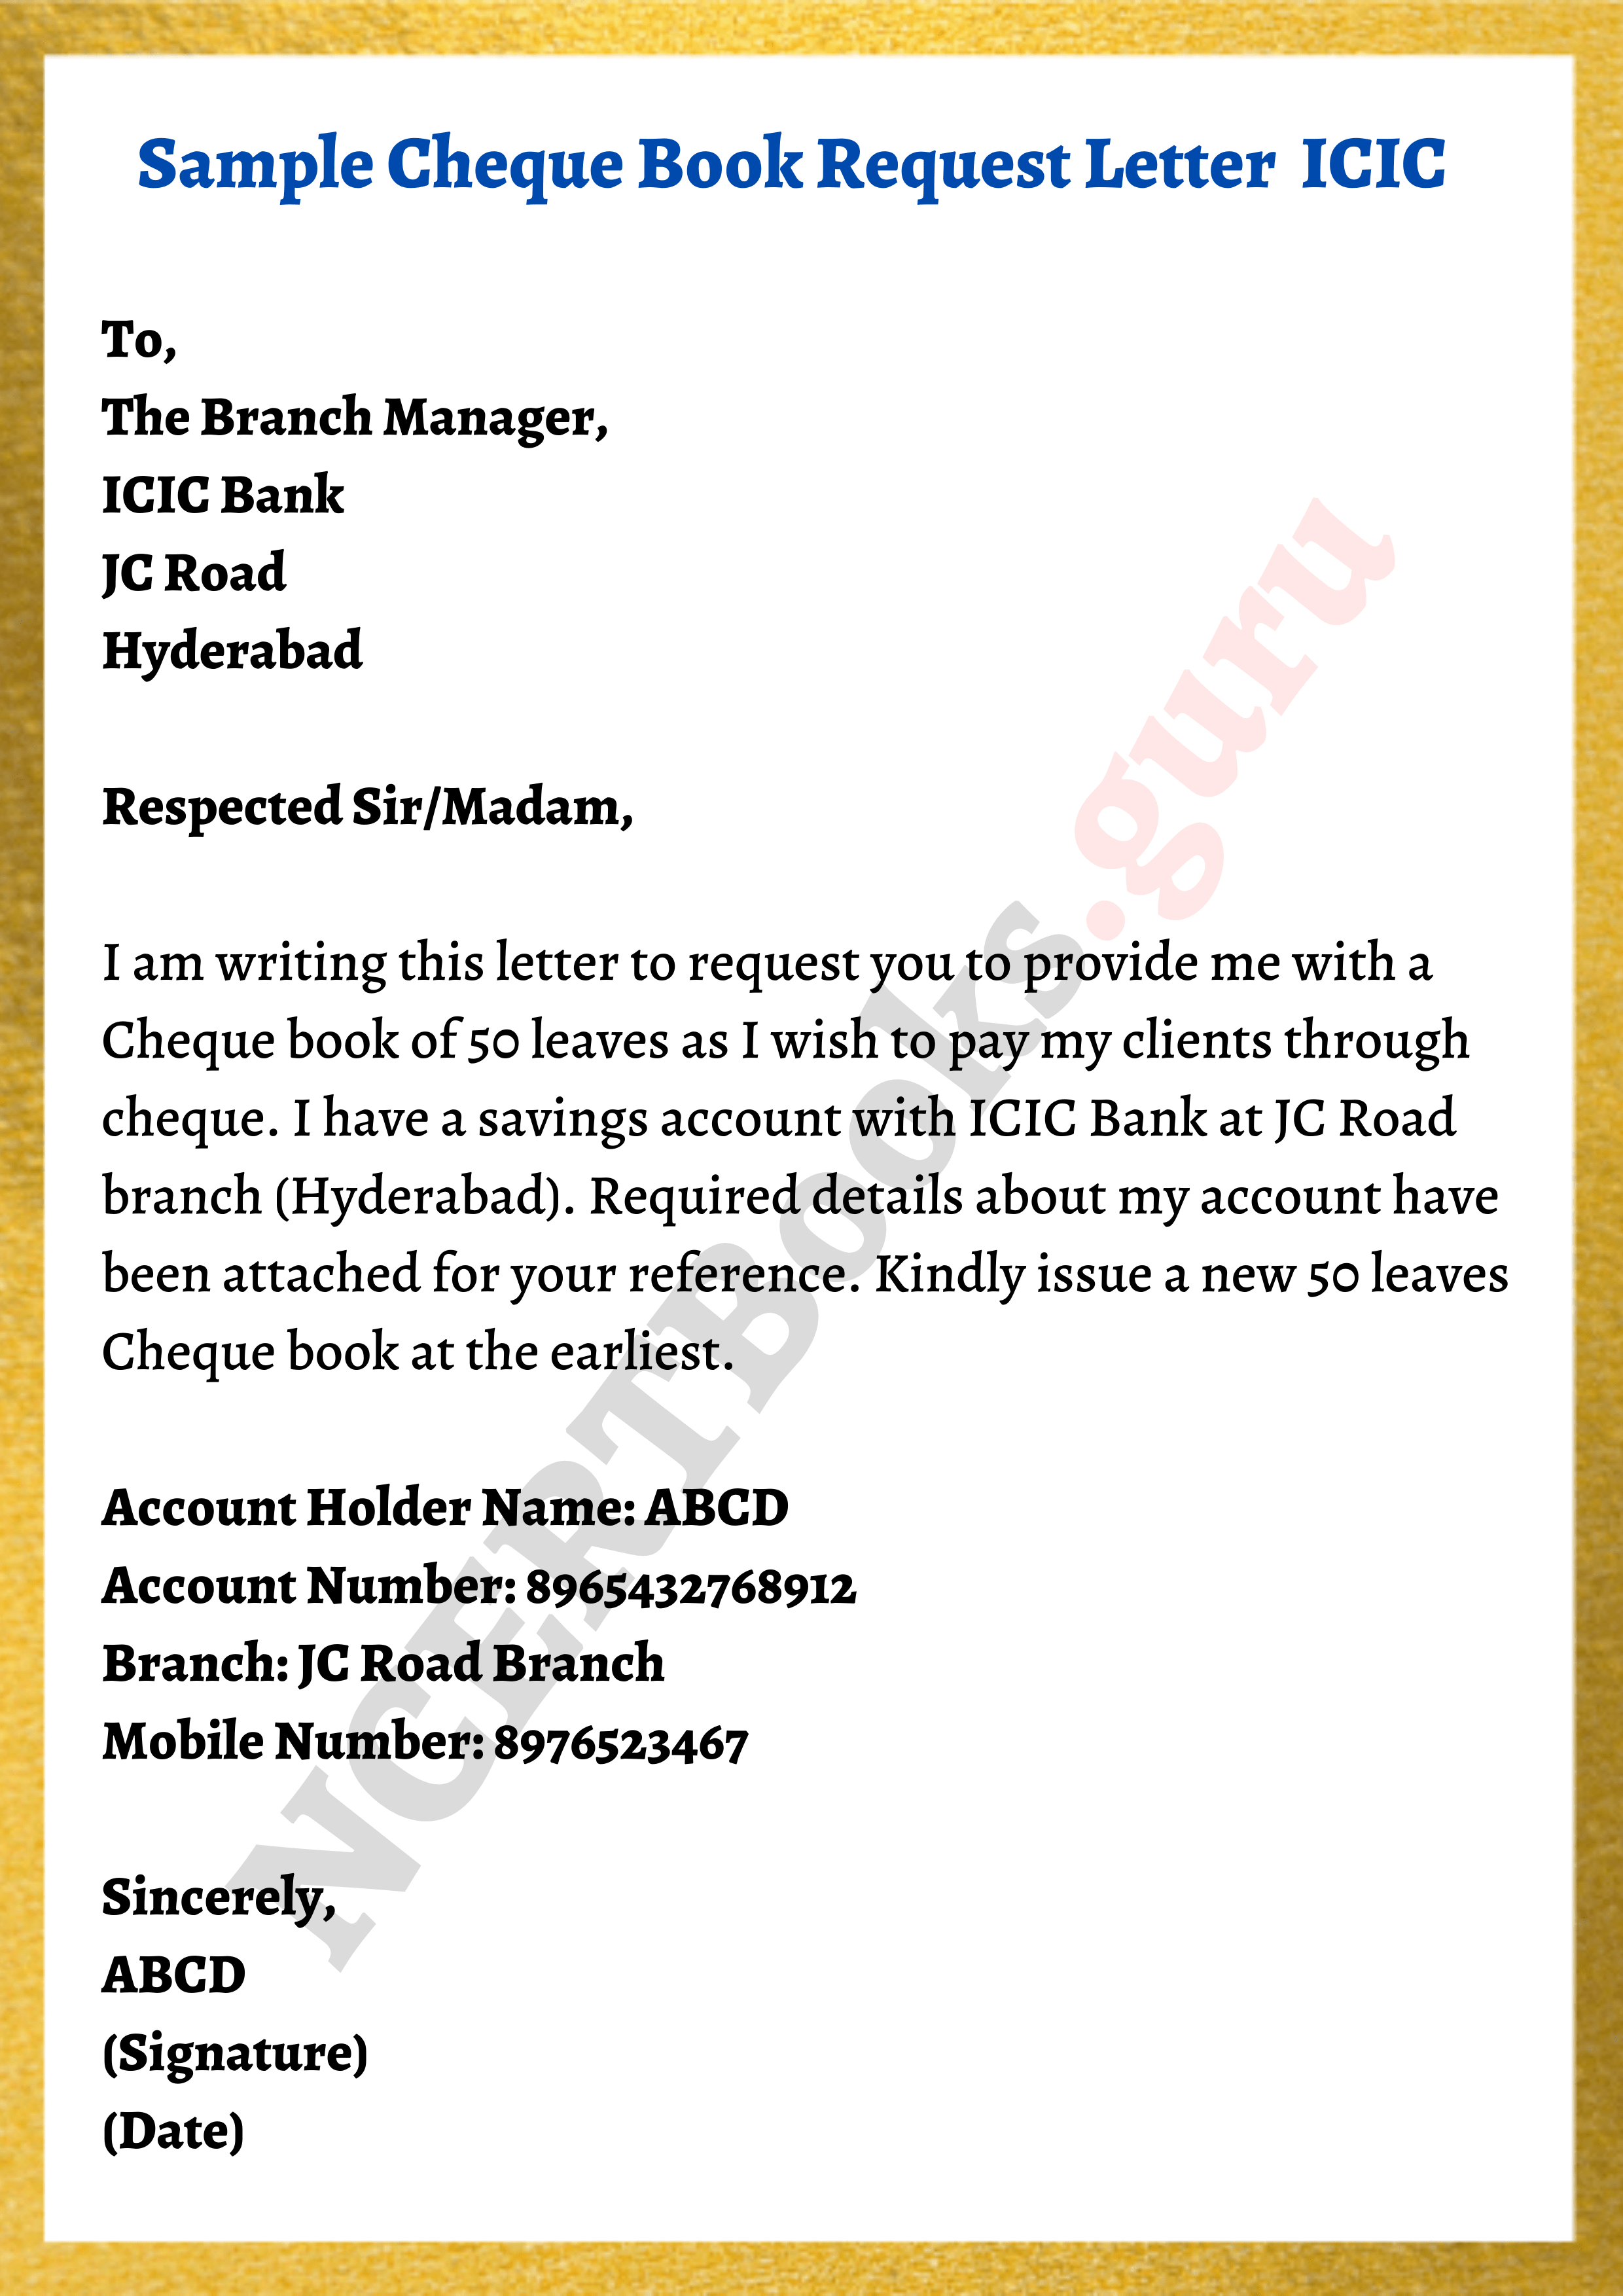 Cheque Book Request Letter Formats, Samples & How To Write ...